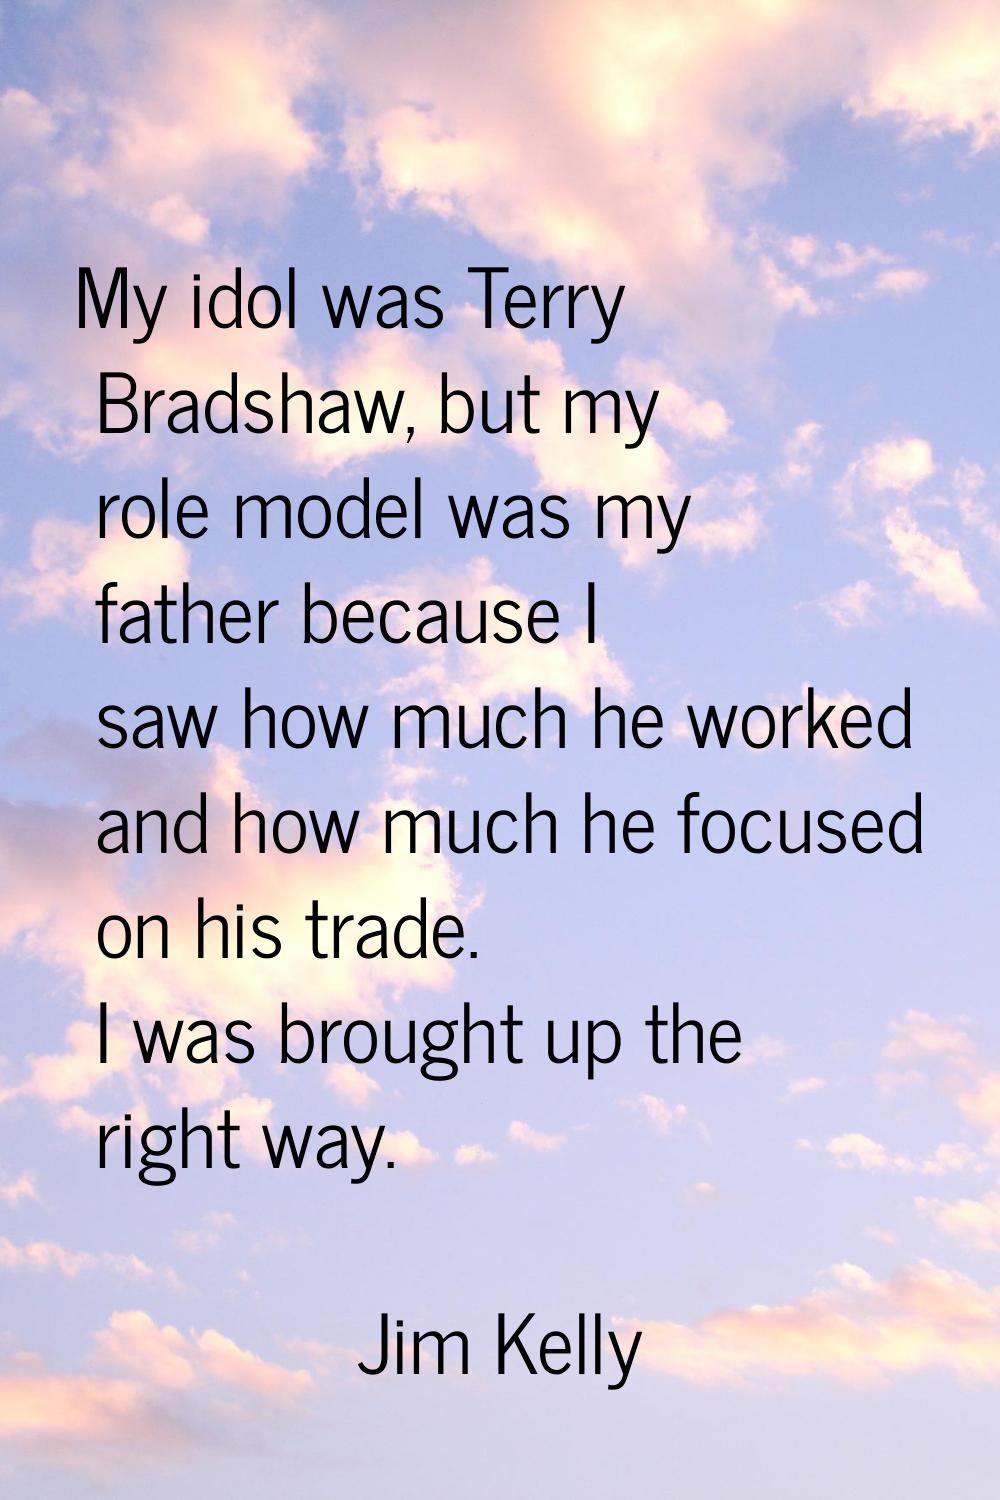 My idol was Terry Bradshaw, but my role model was my father because I saw how much he worked and ho